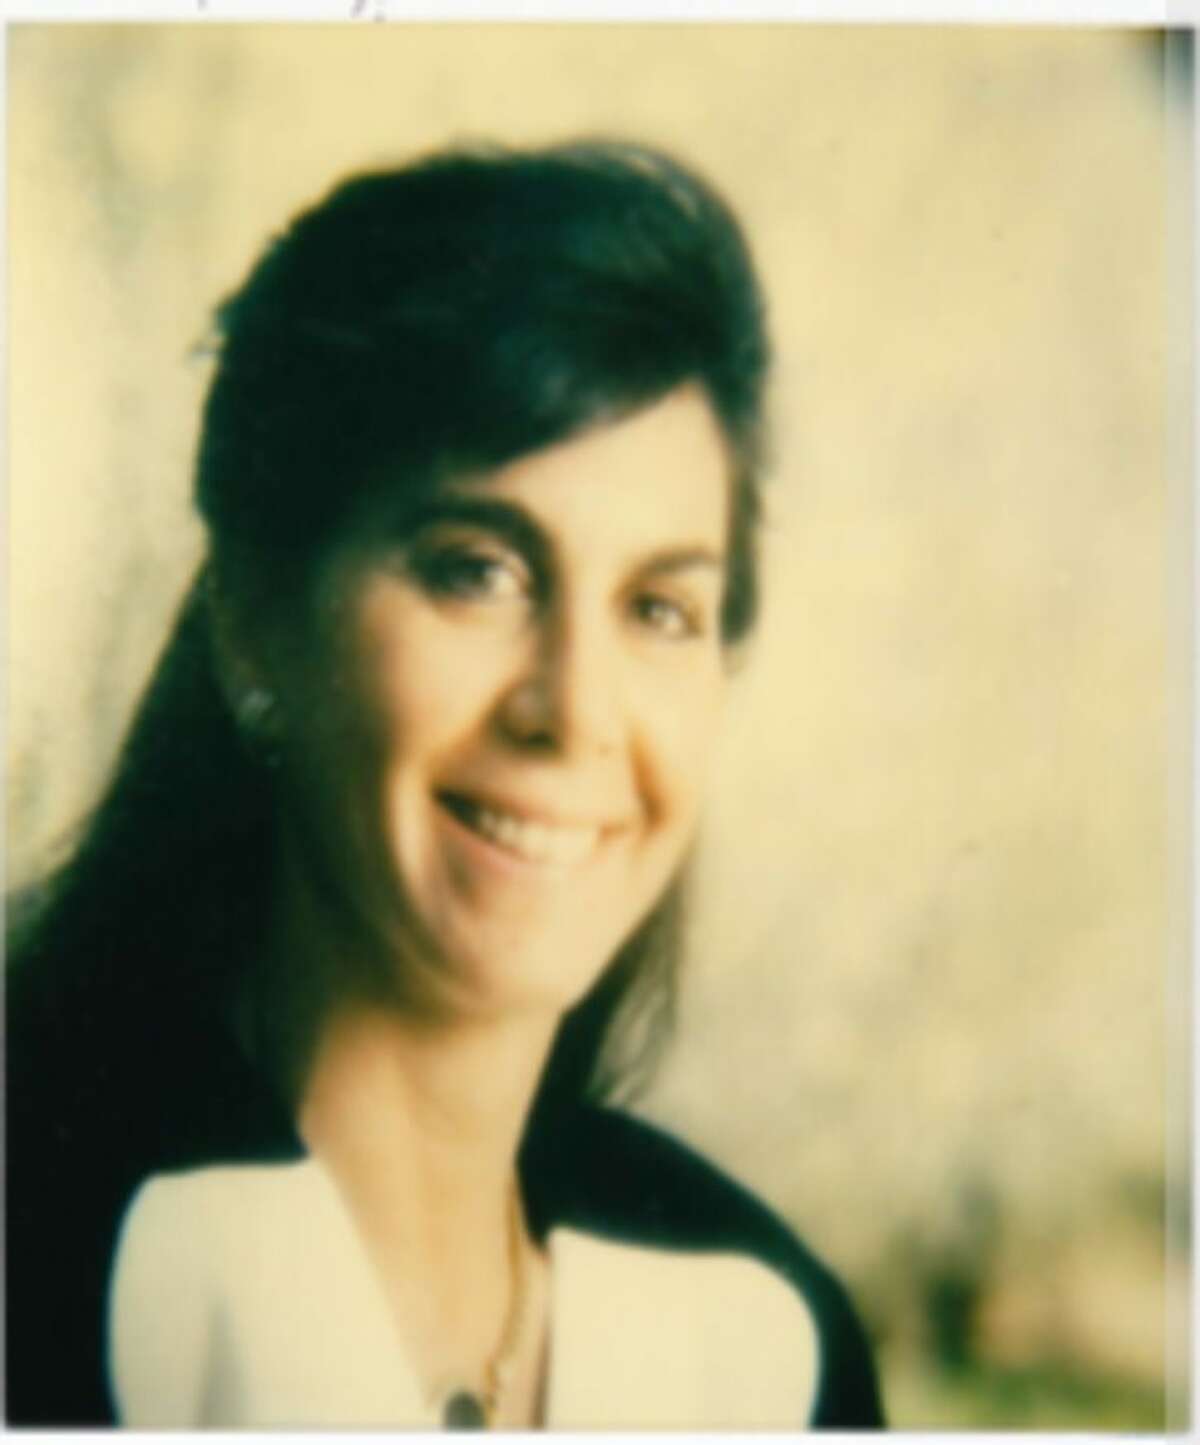 Joan Wertkin, a 38-year-old mother of two, was found strangled behind a Main Street shopping plaza on the night of May 24, 1989, according to Westport police. Her body had been burned. Wertkin's killing remains unsolved.